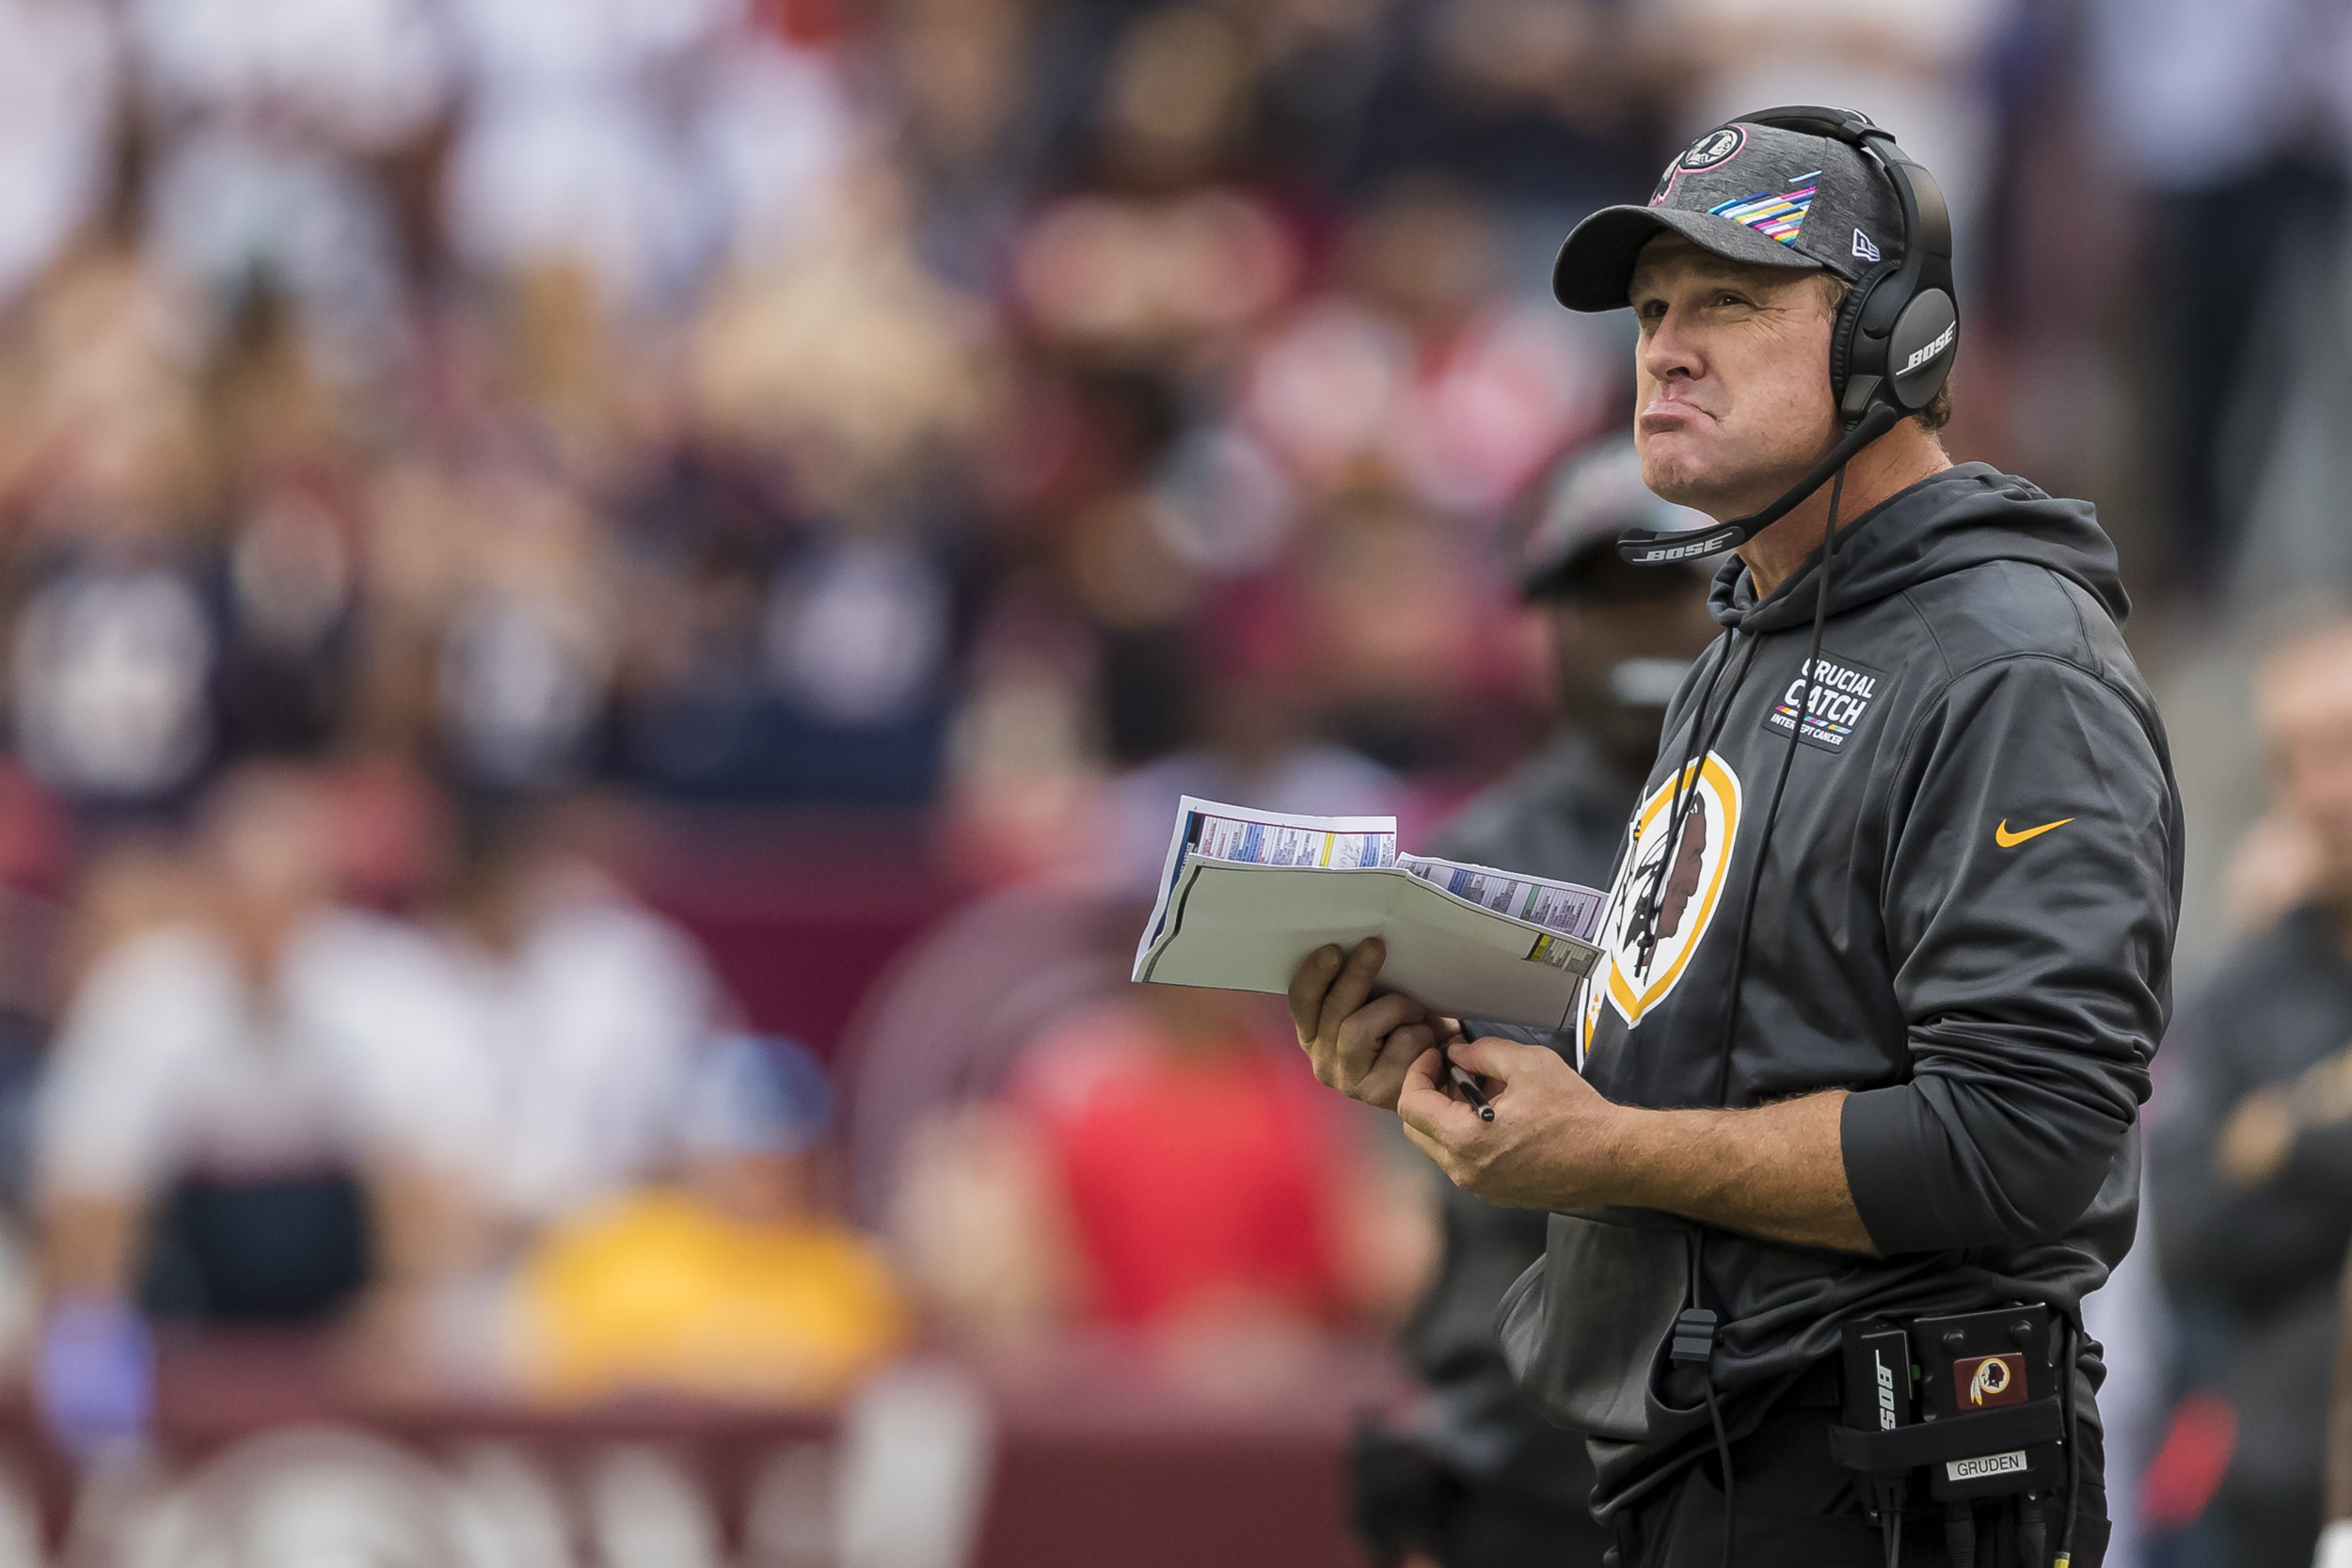 Next Washington Redskins Head Coach: Five Candidates to Replace Jay Gruden